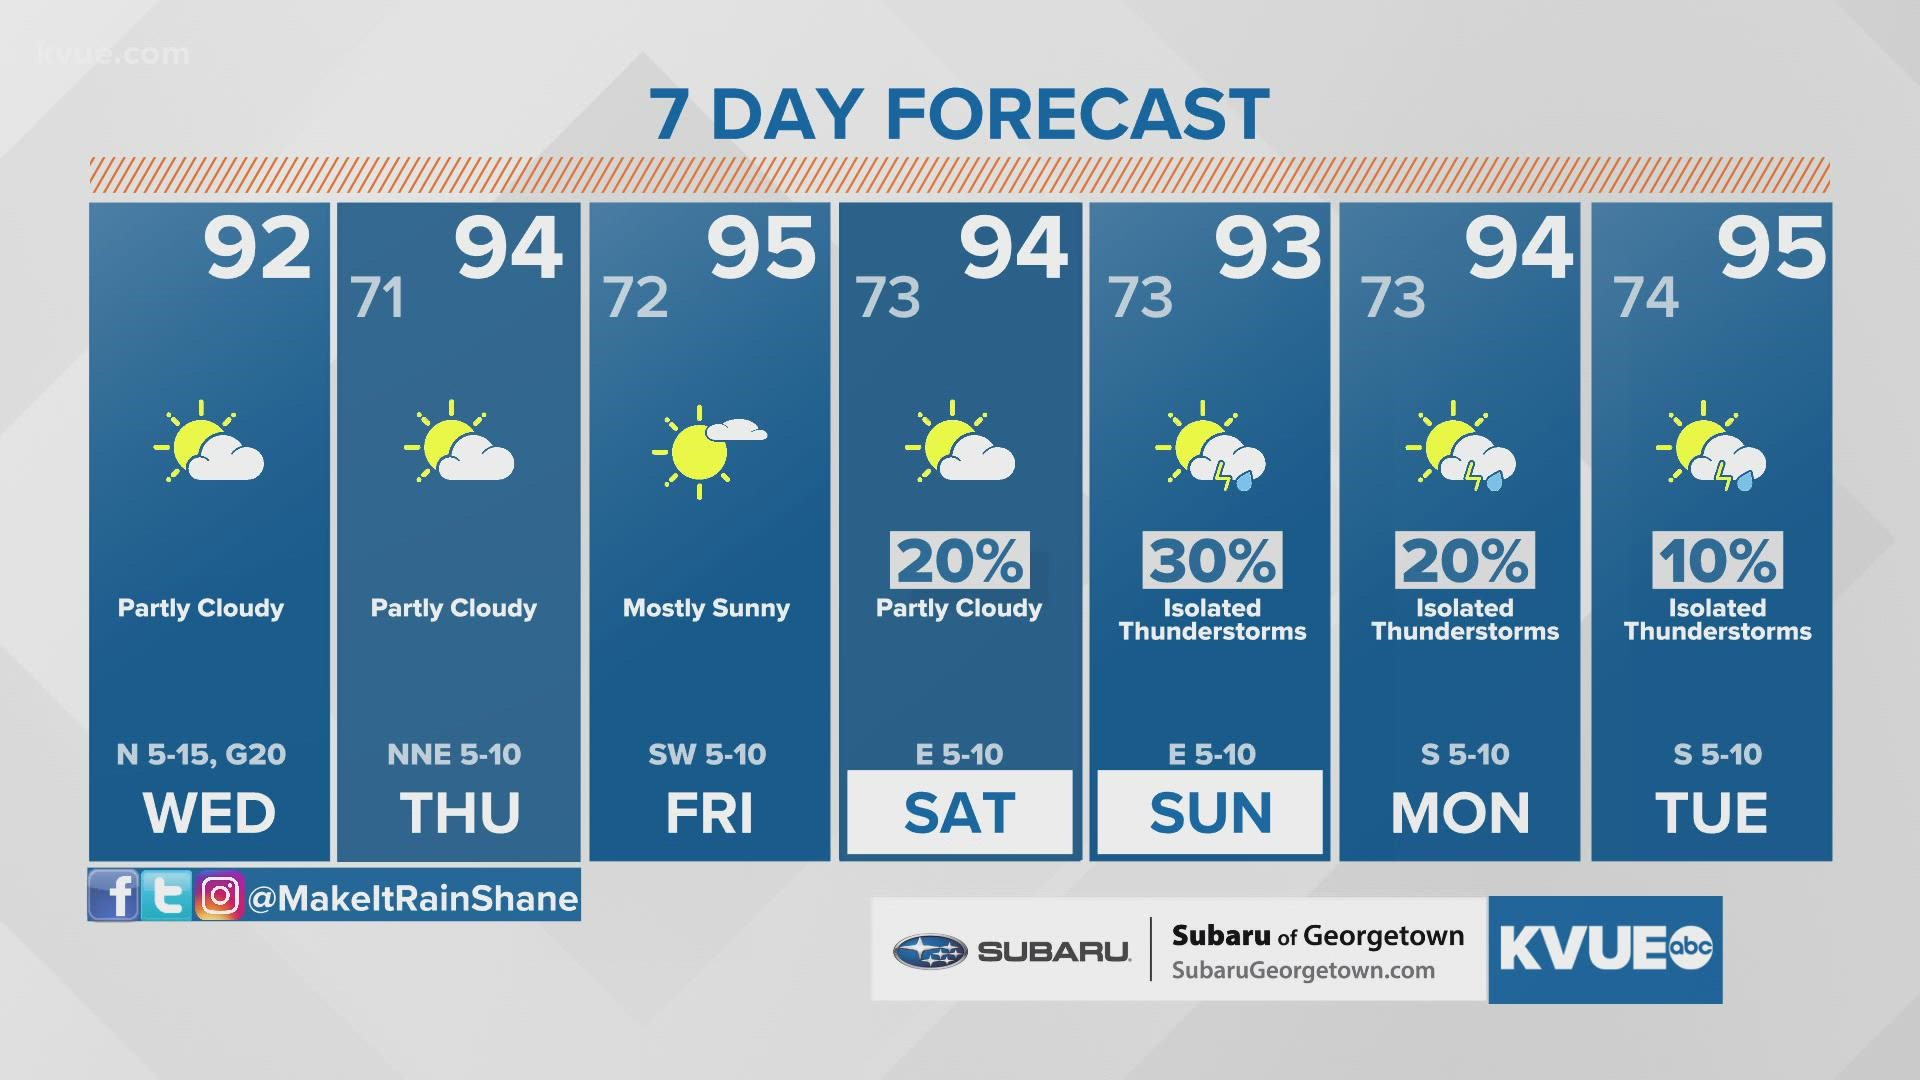 Temperatures return to the mid-90s for the end of the workweek